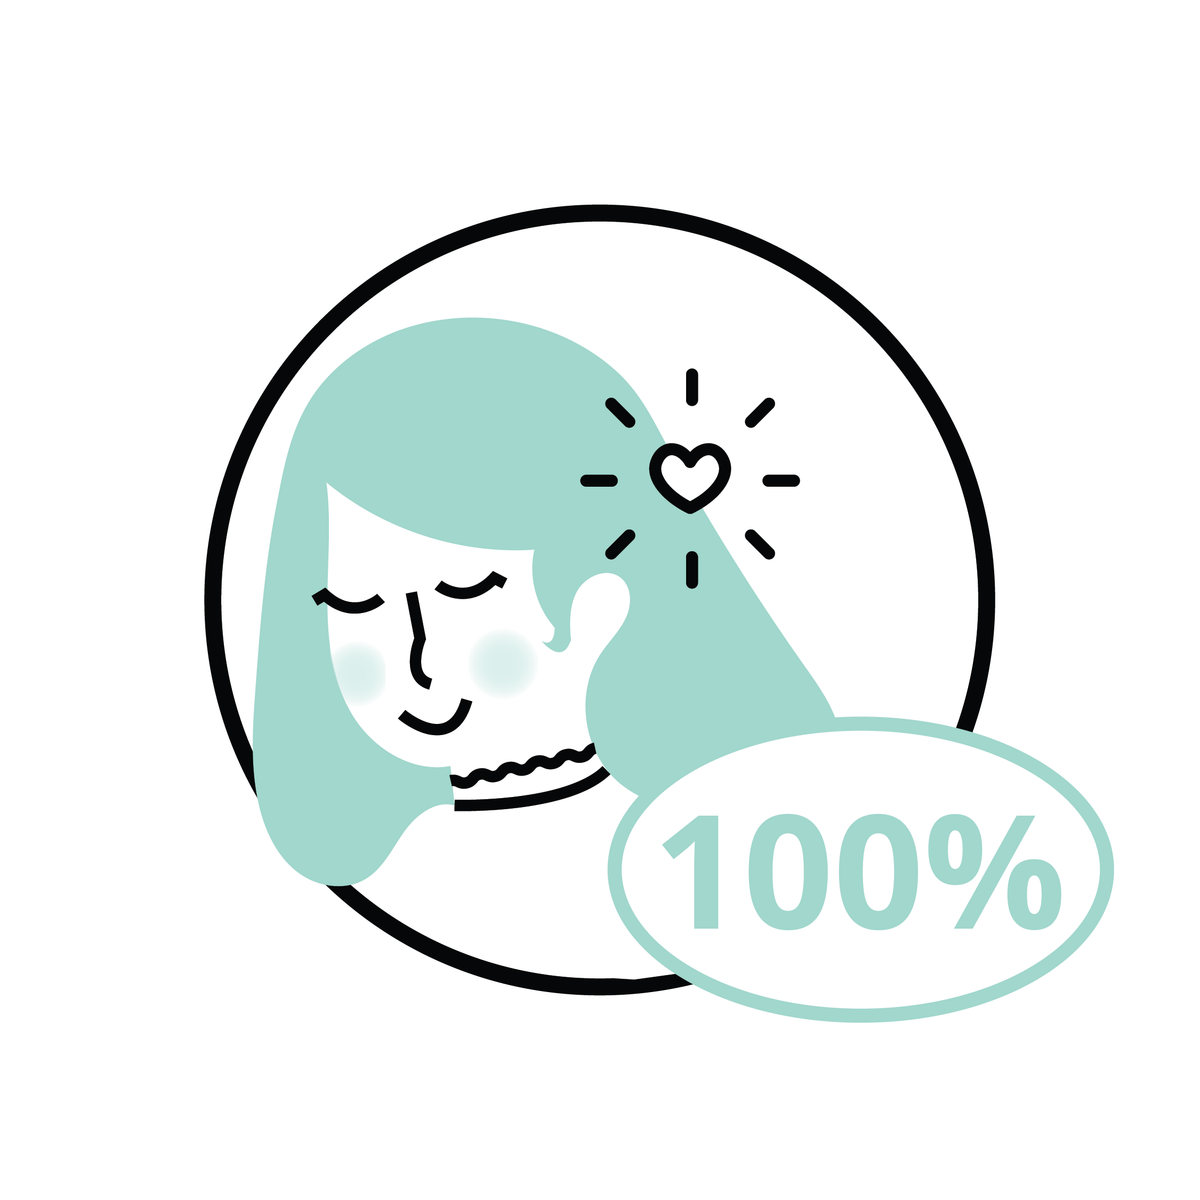 icon of a girl in teal with a heart symbol above her head and a bubble housing 100% to the bottom right